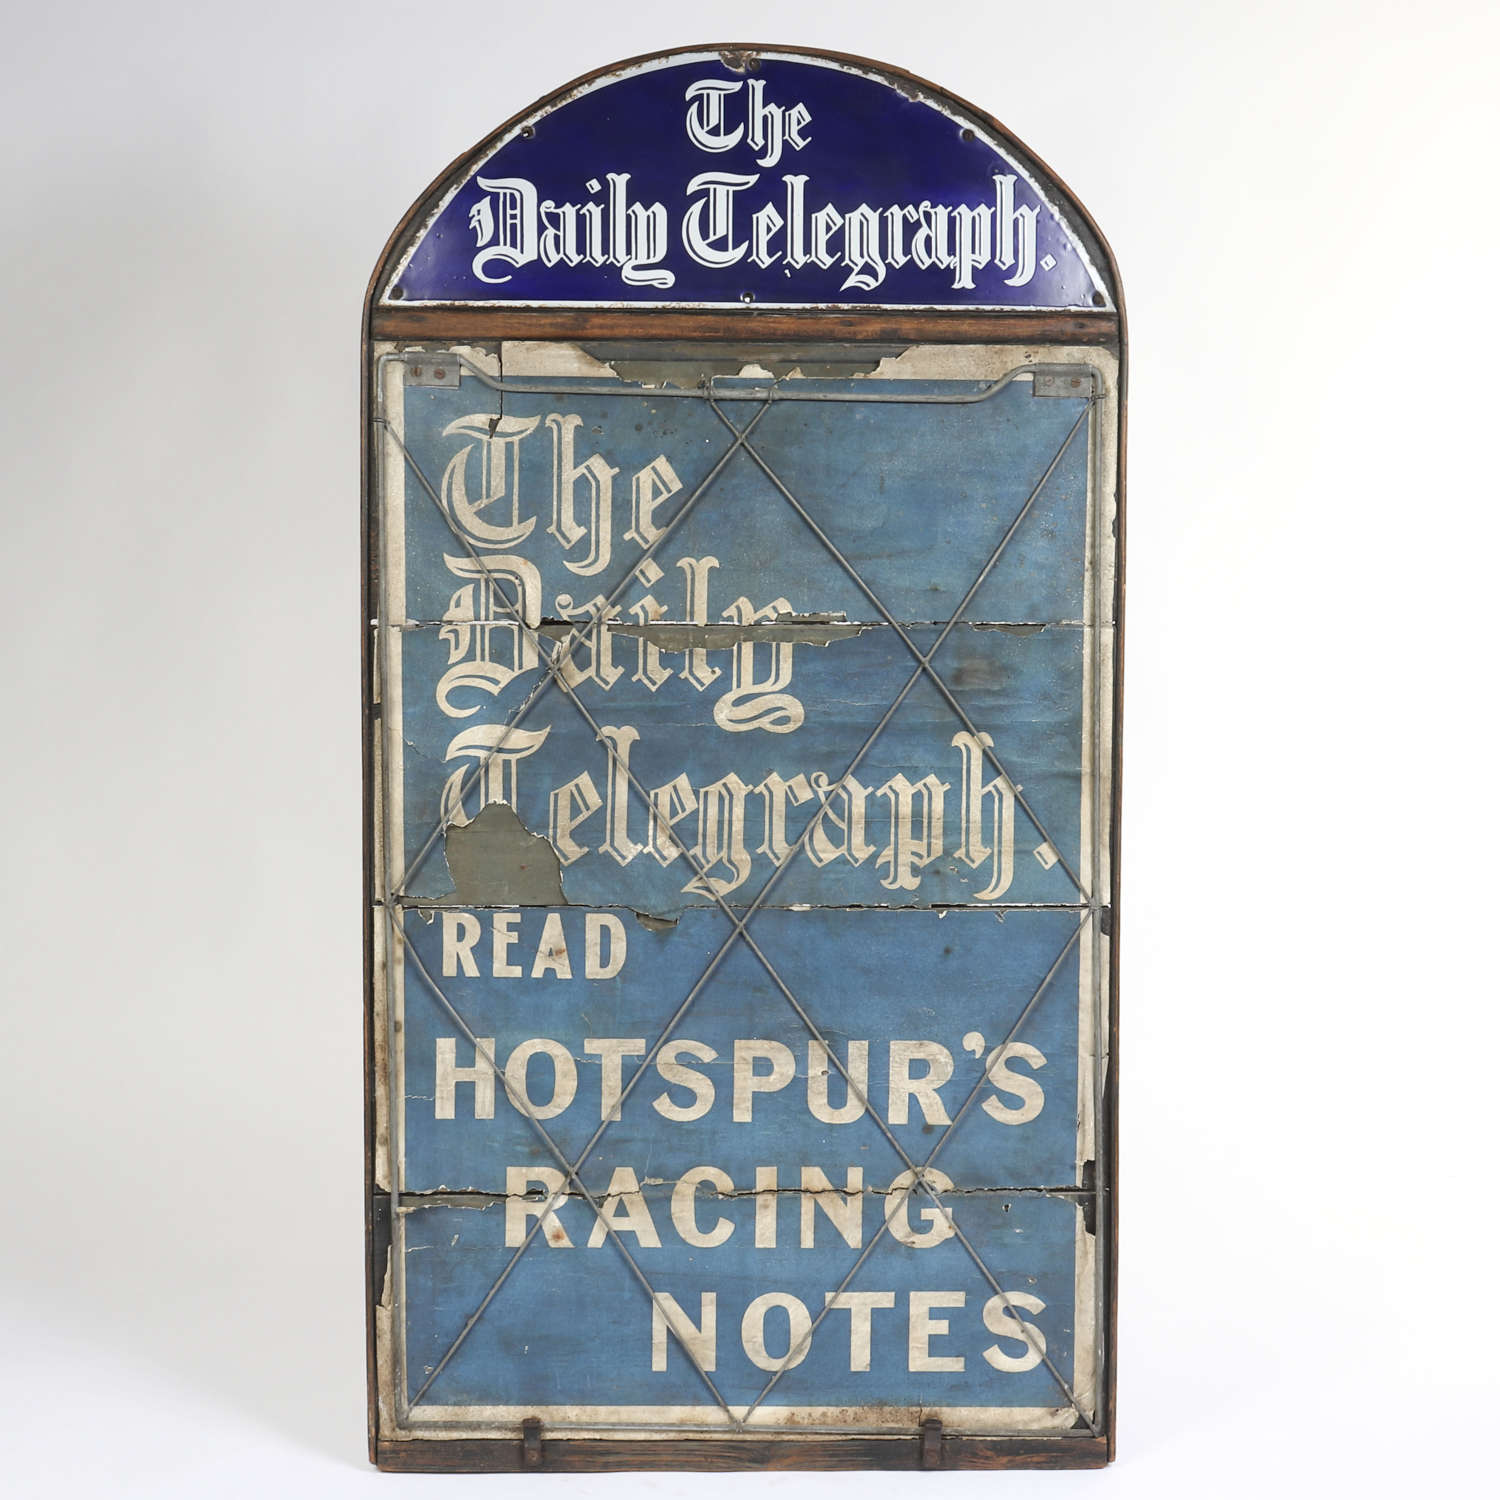 Daily Telegraph newspaper advertising sign